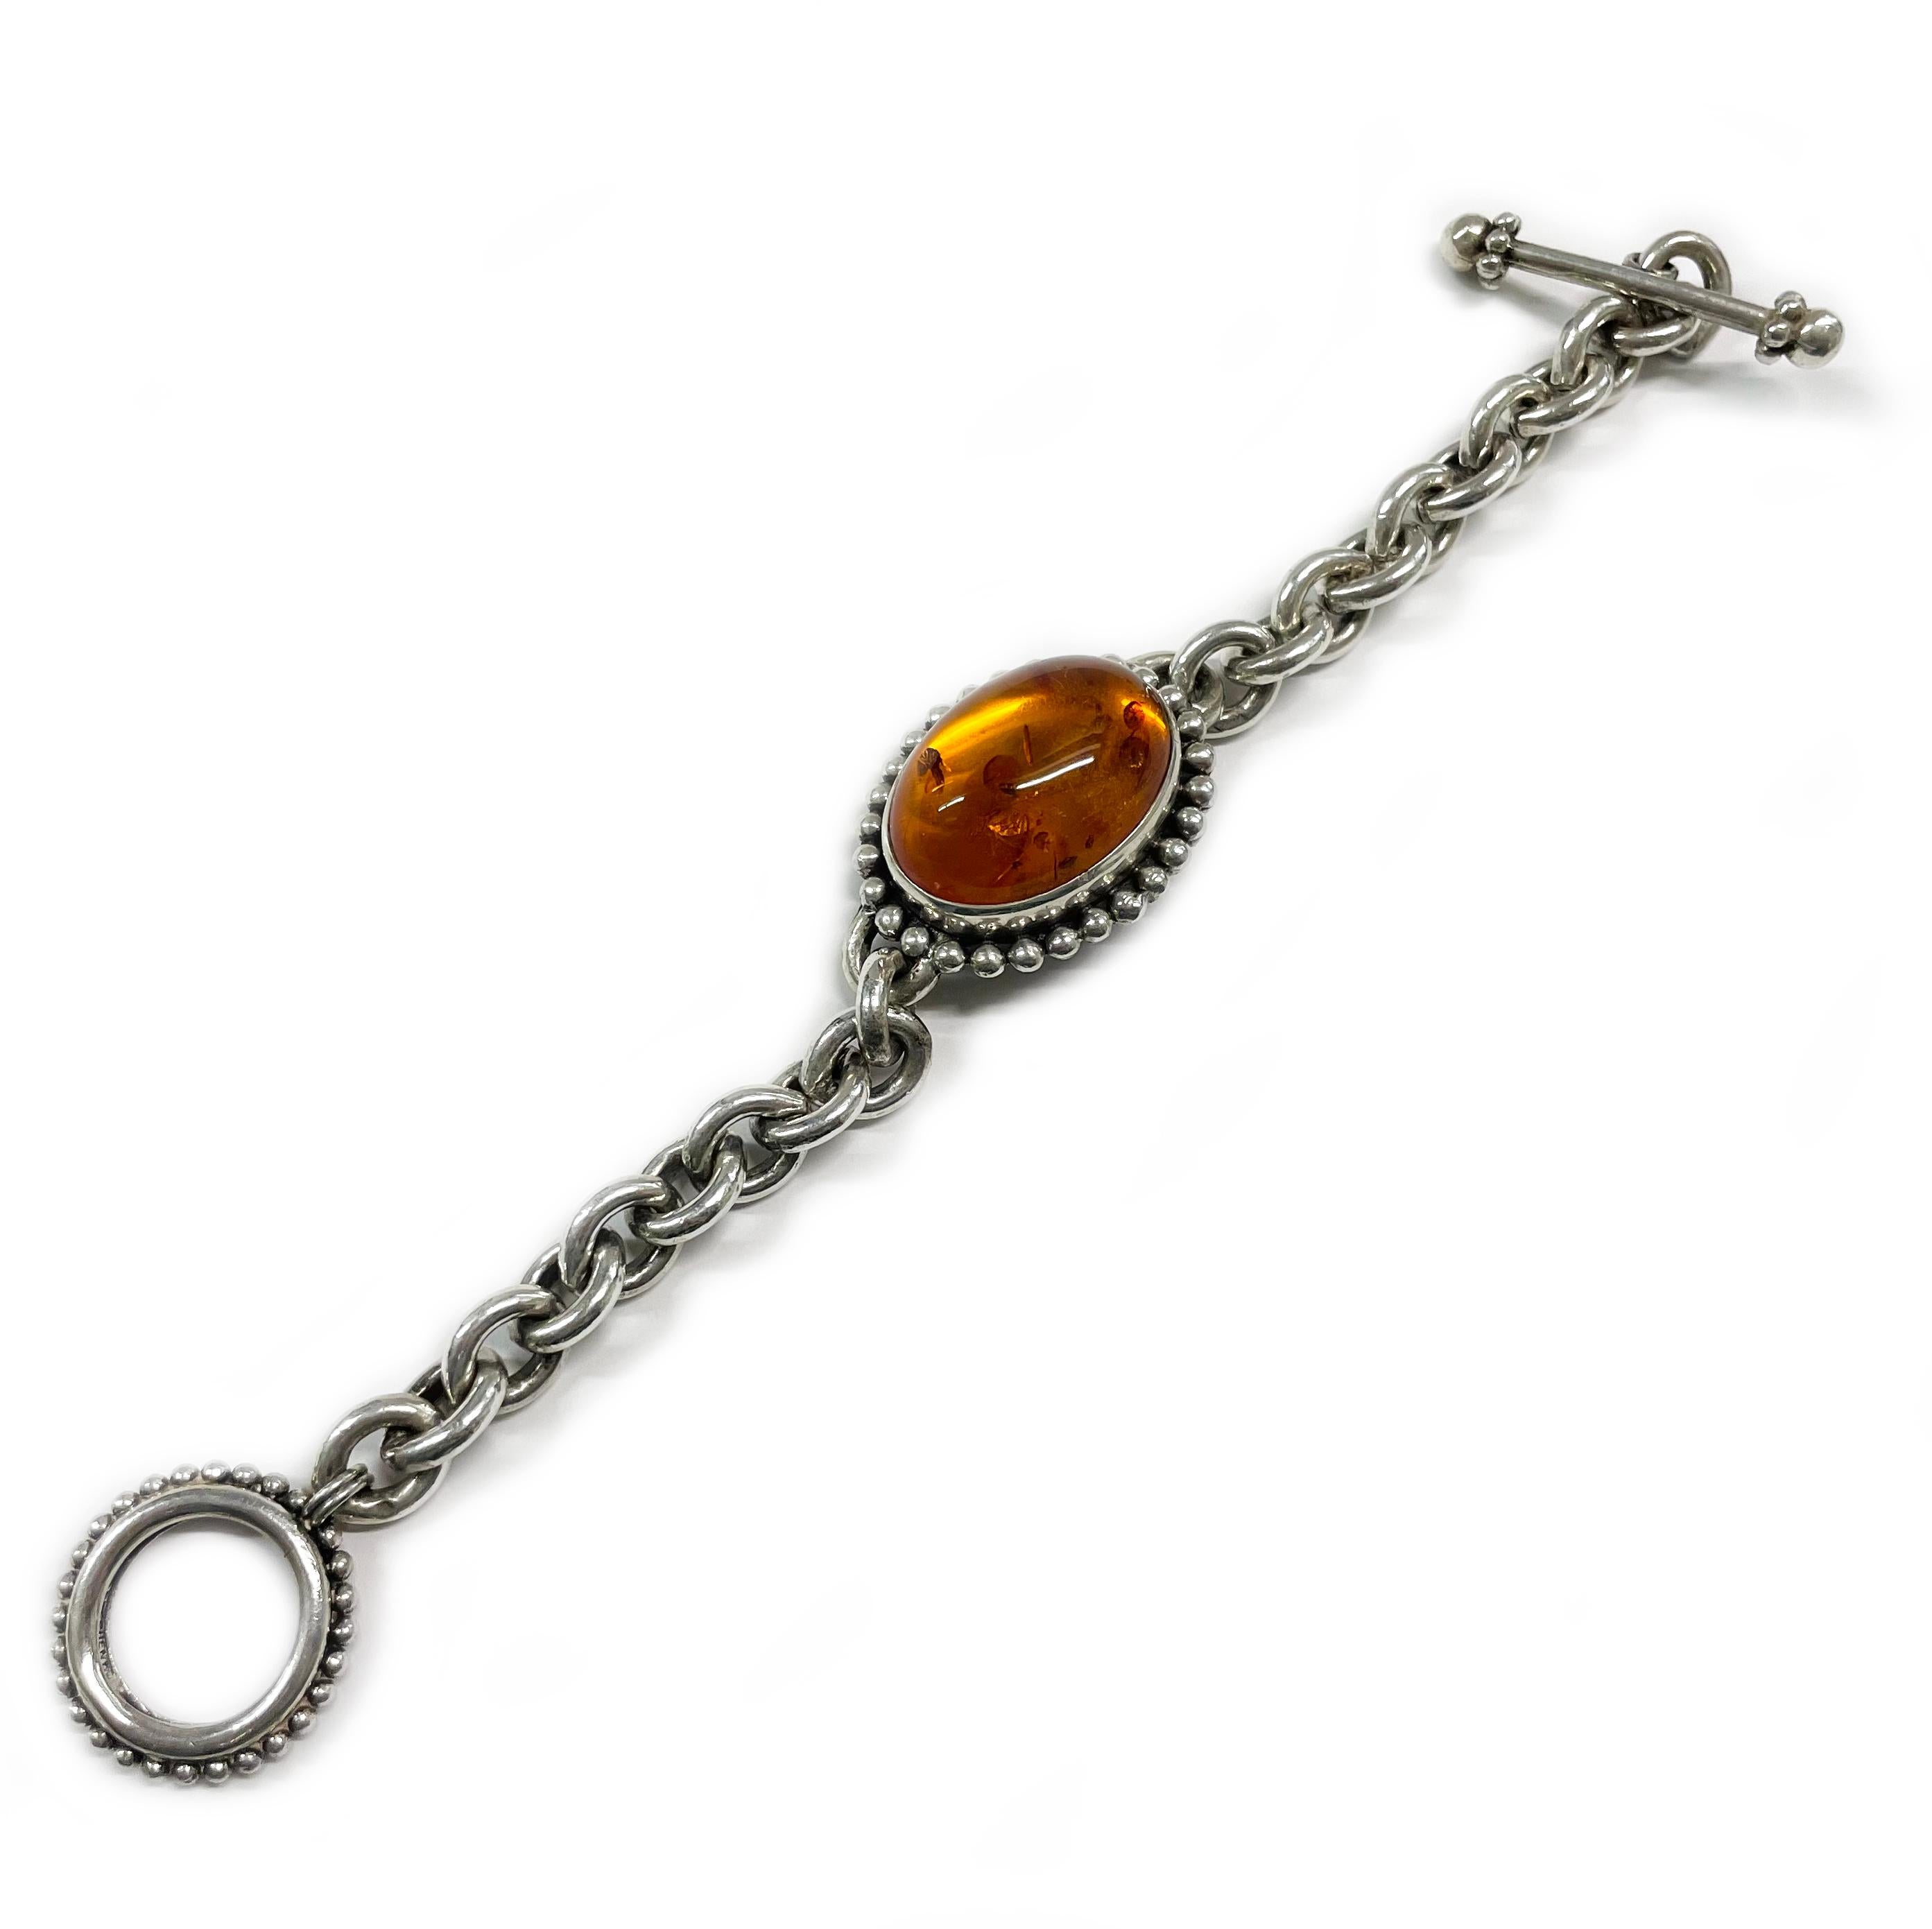 Stephen Dweck Sterling Silver Baltic Amber Bracelet. The large oval Baltic Amber cabochon is bezel-set with a beaded surround. The Amber cabochon measures approximately 25 x 19mm. The bracelet features a chain-link with an oval bezel connector with